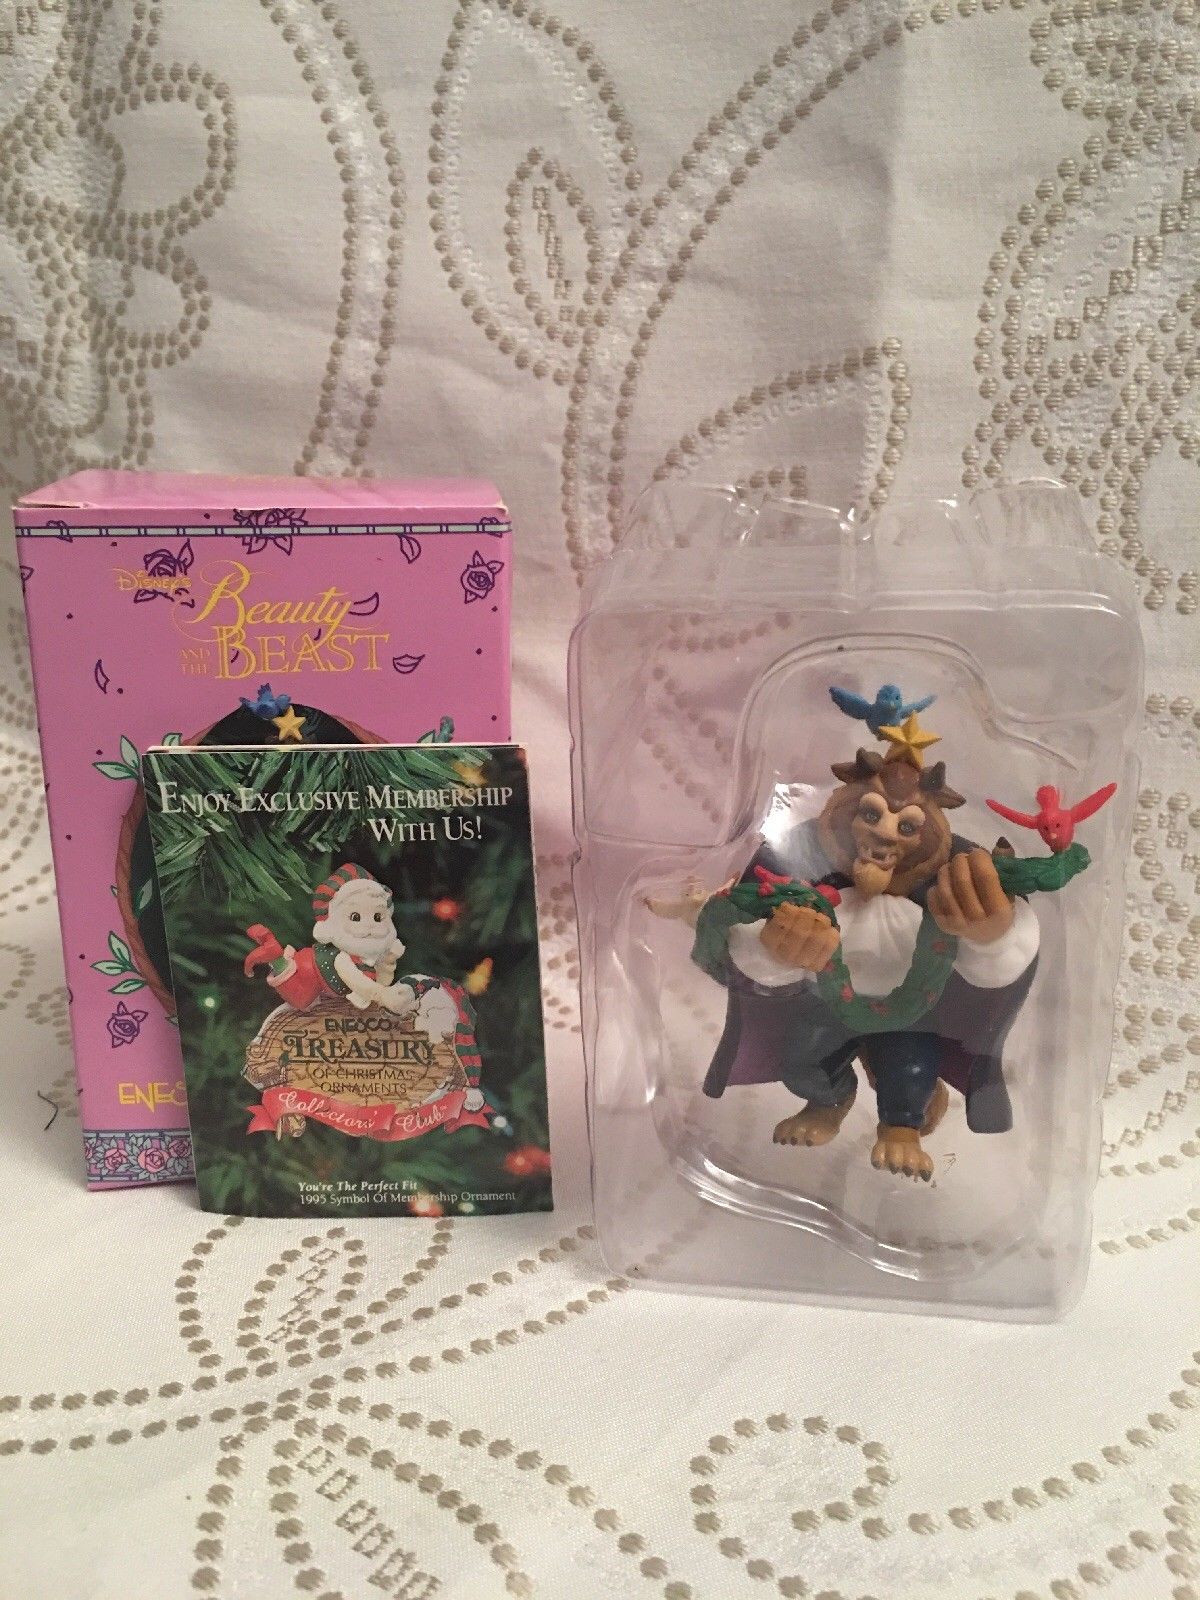 ENESCO DISNEY ORNAMENT BEAUTY AND THE BEAST A Bough for Belle ornament vintage